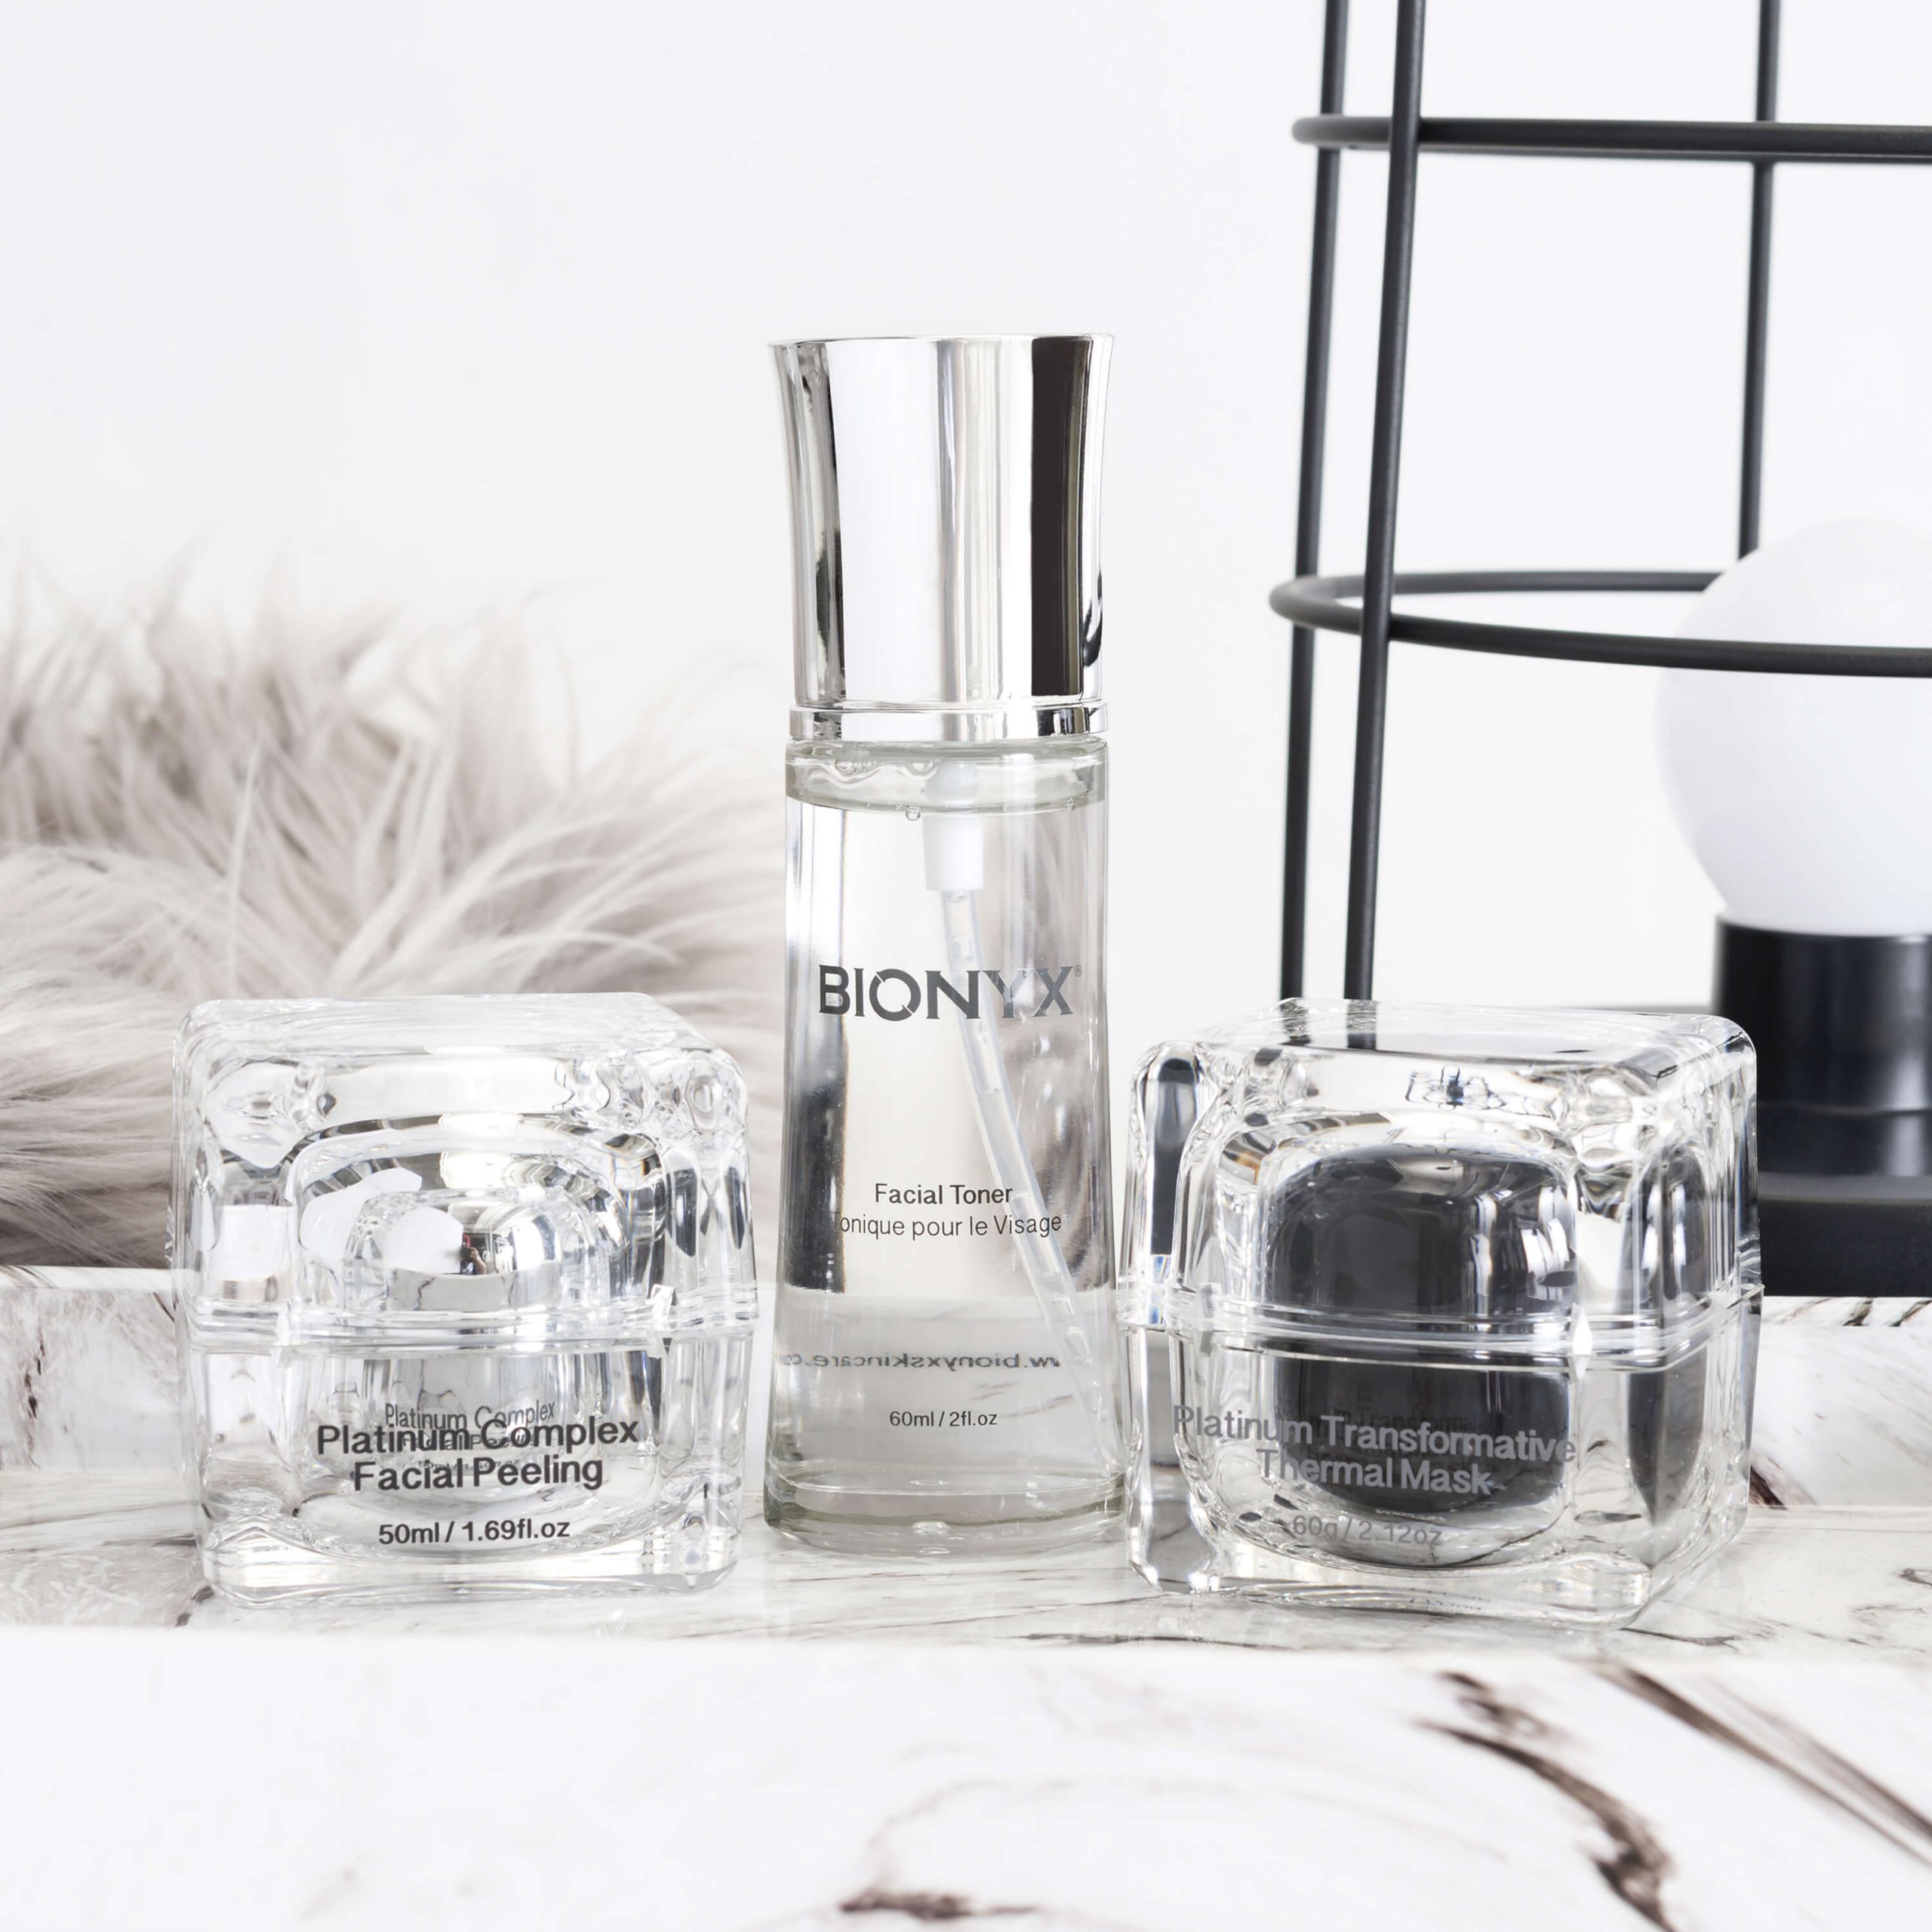 Bionyx skincare for fall products